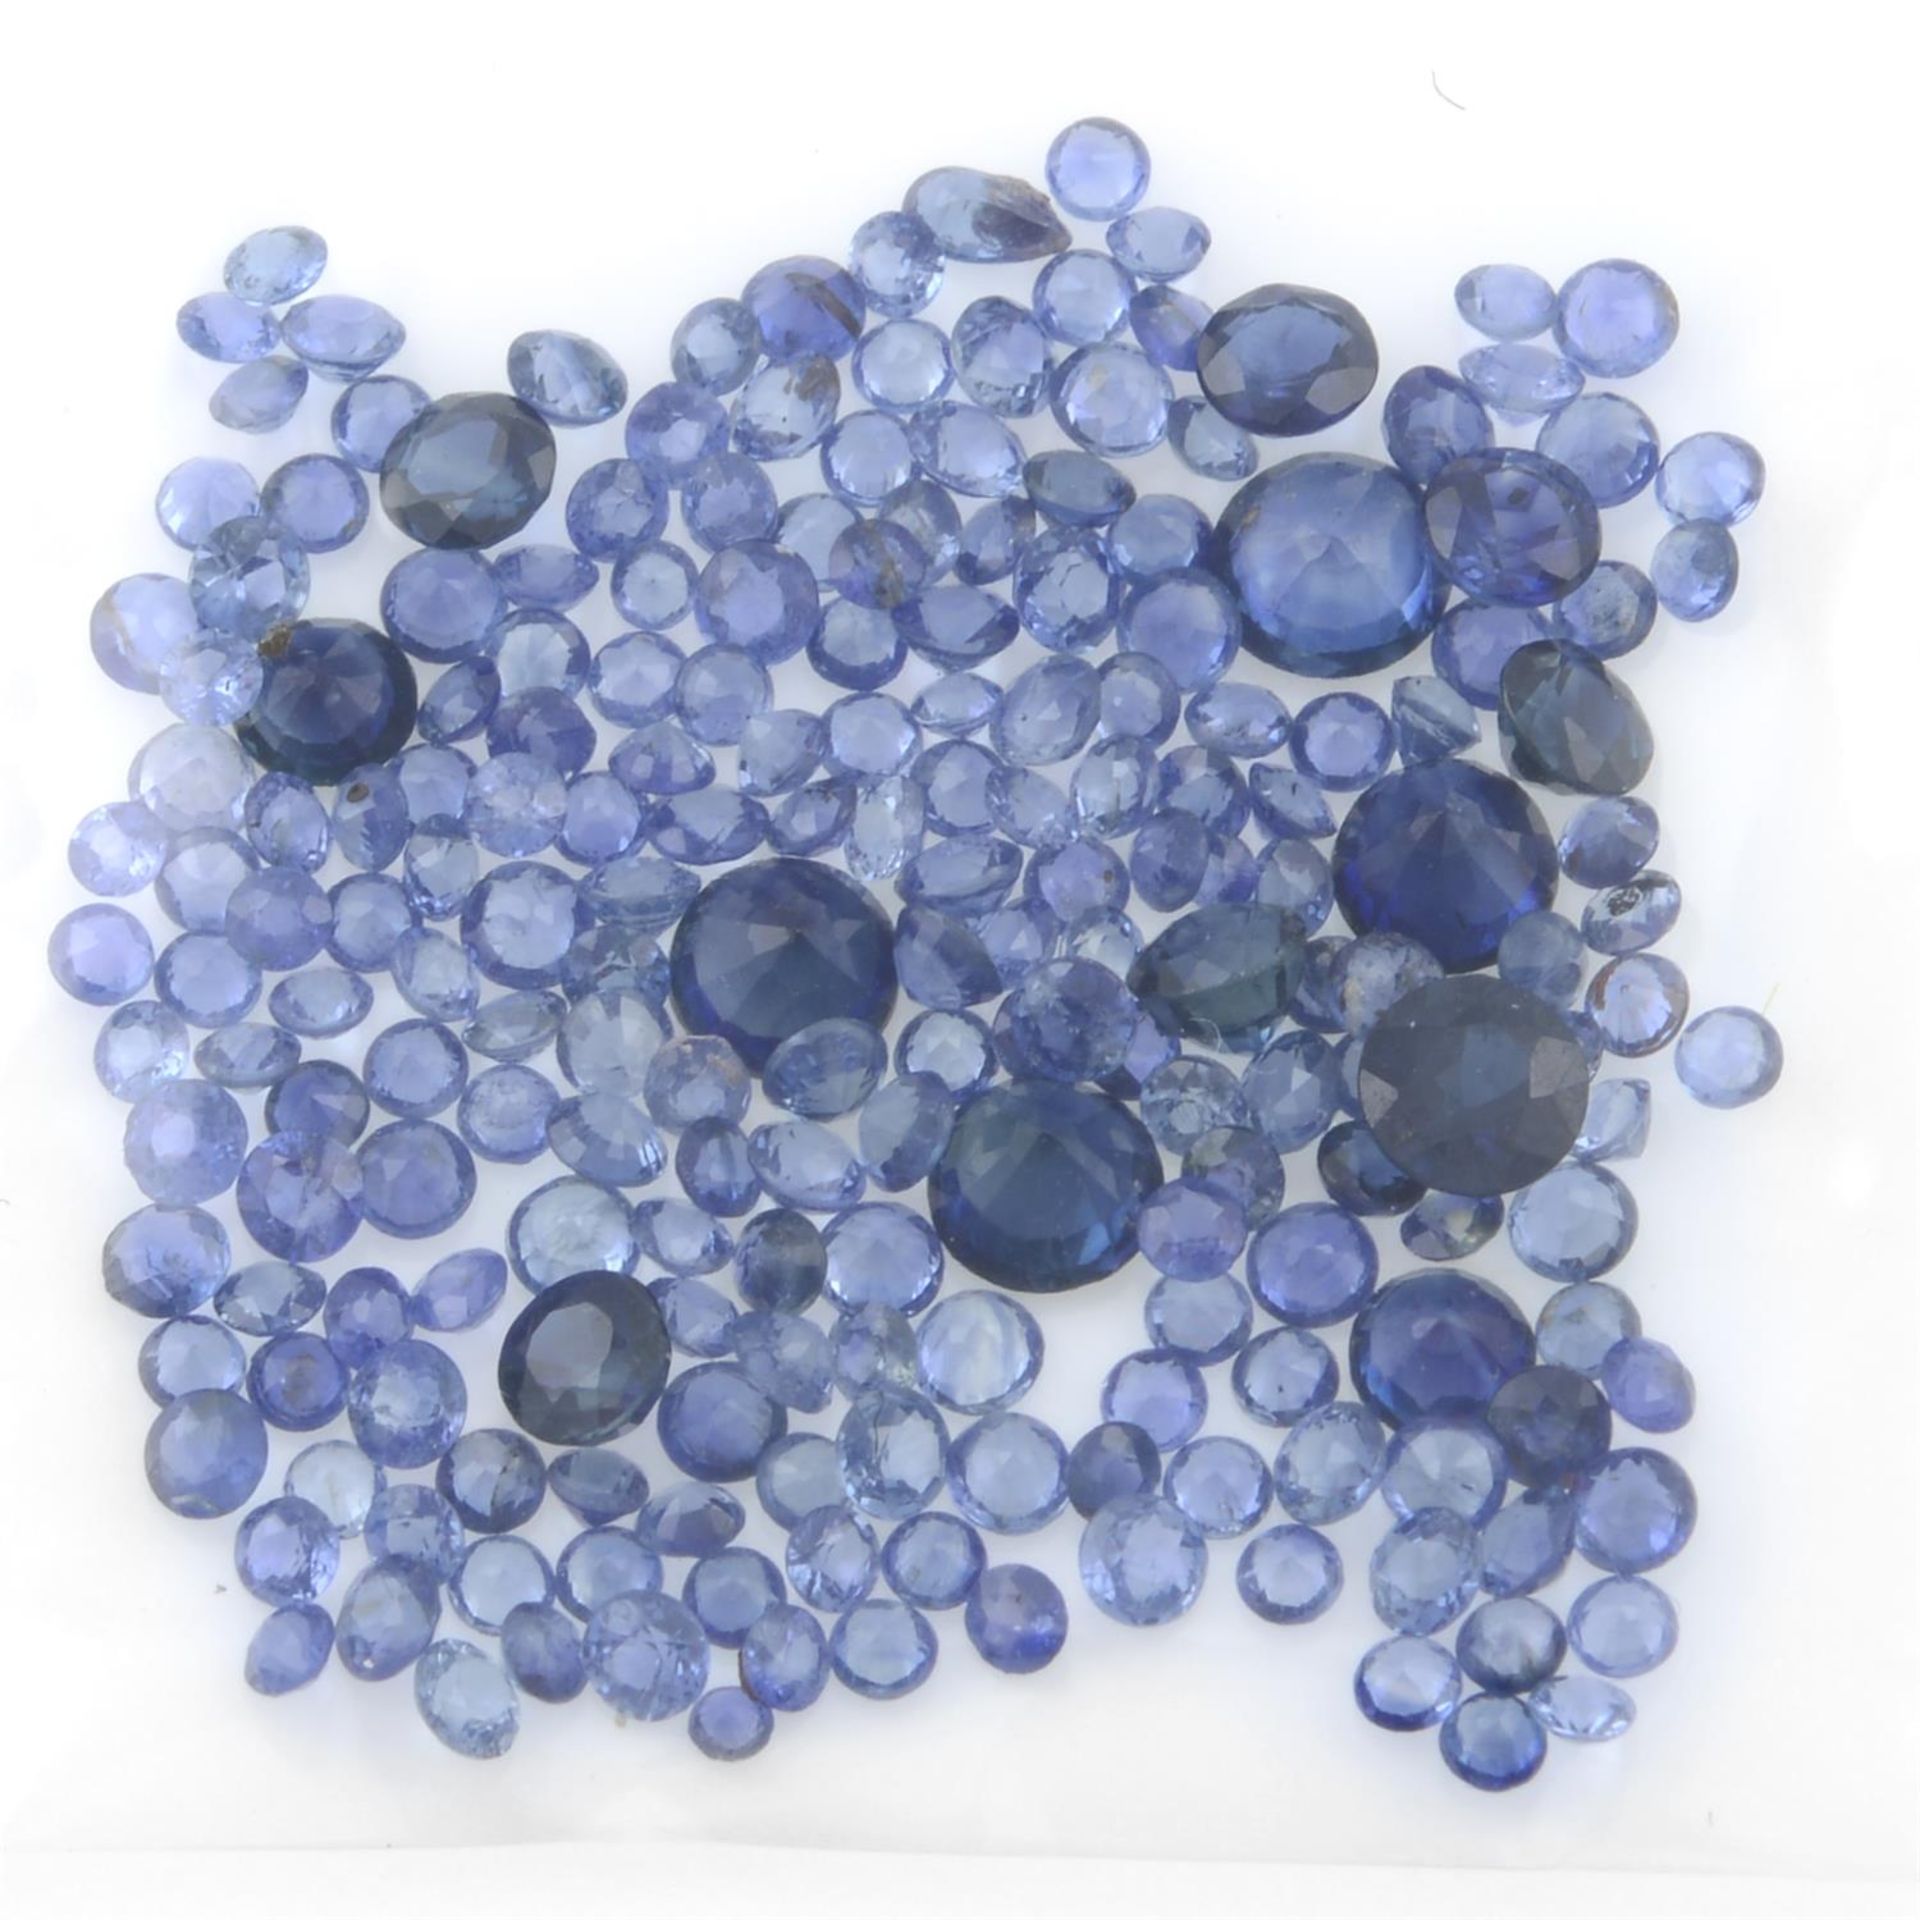 STUART DEVLIN STOCK - Selection of circular shape blue sapphires, weighing 2.24ct - Image 2 of 2